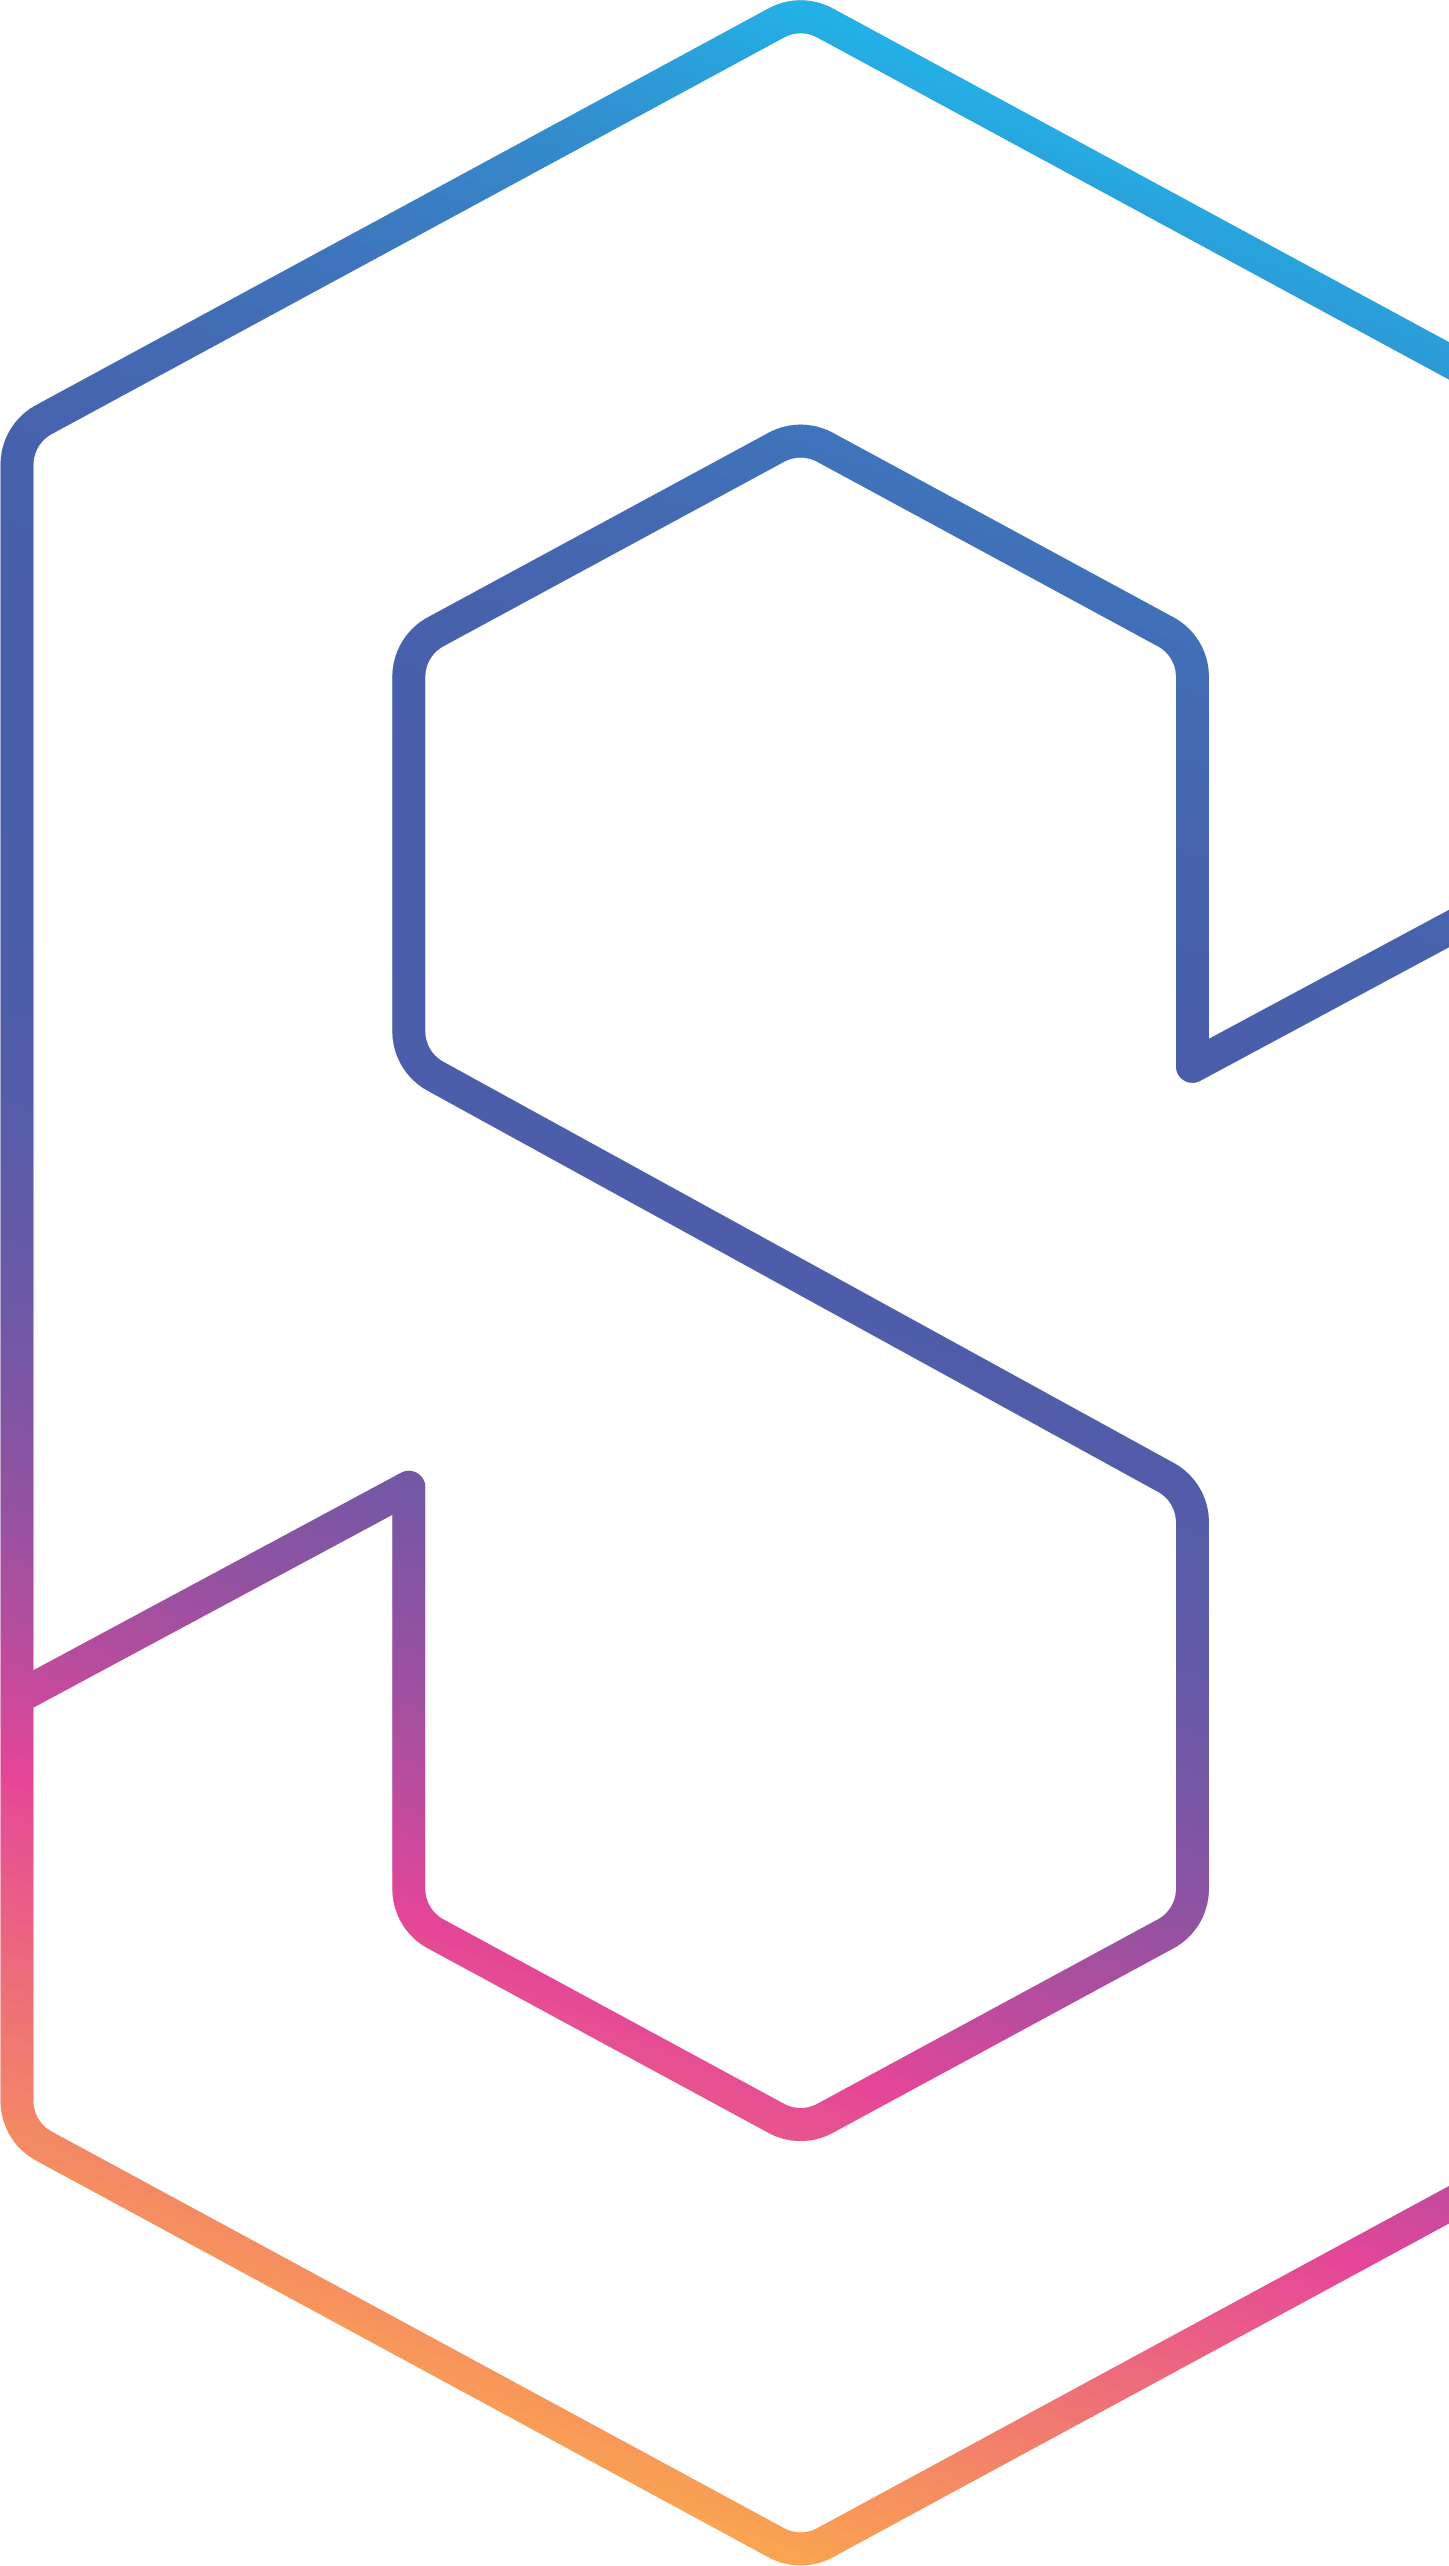 An stylized icon of the letter S